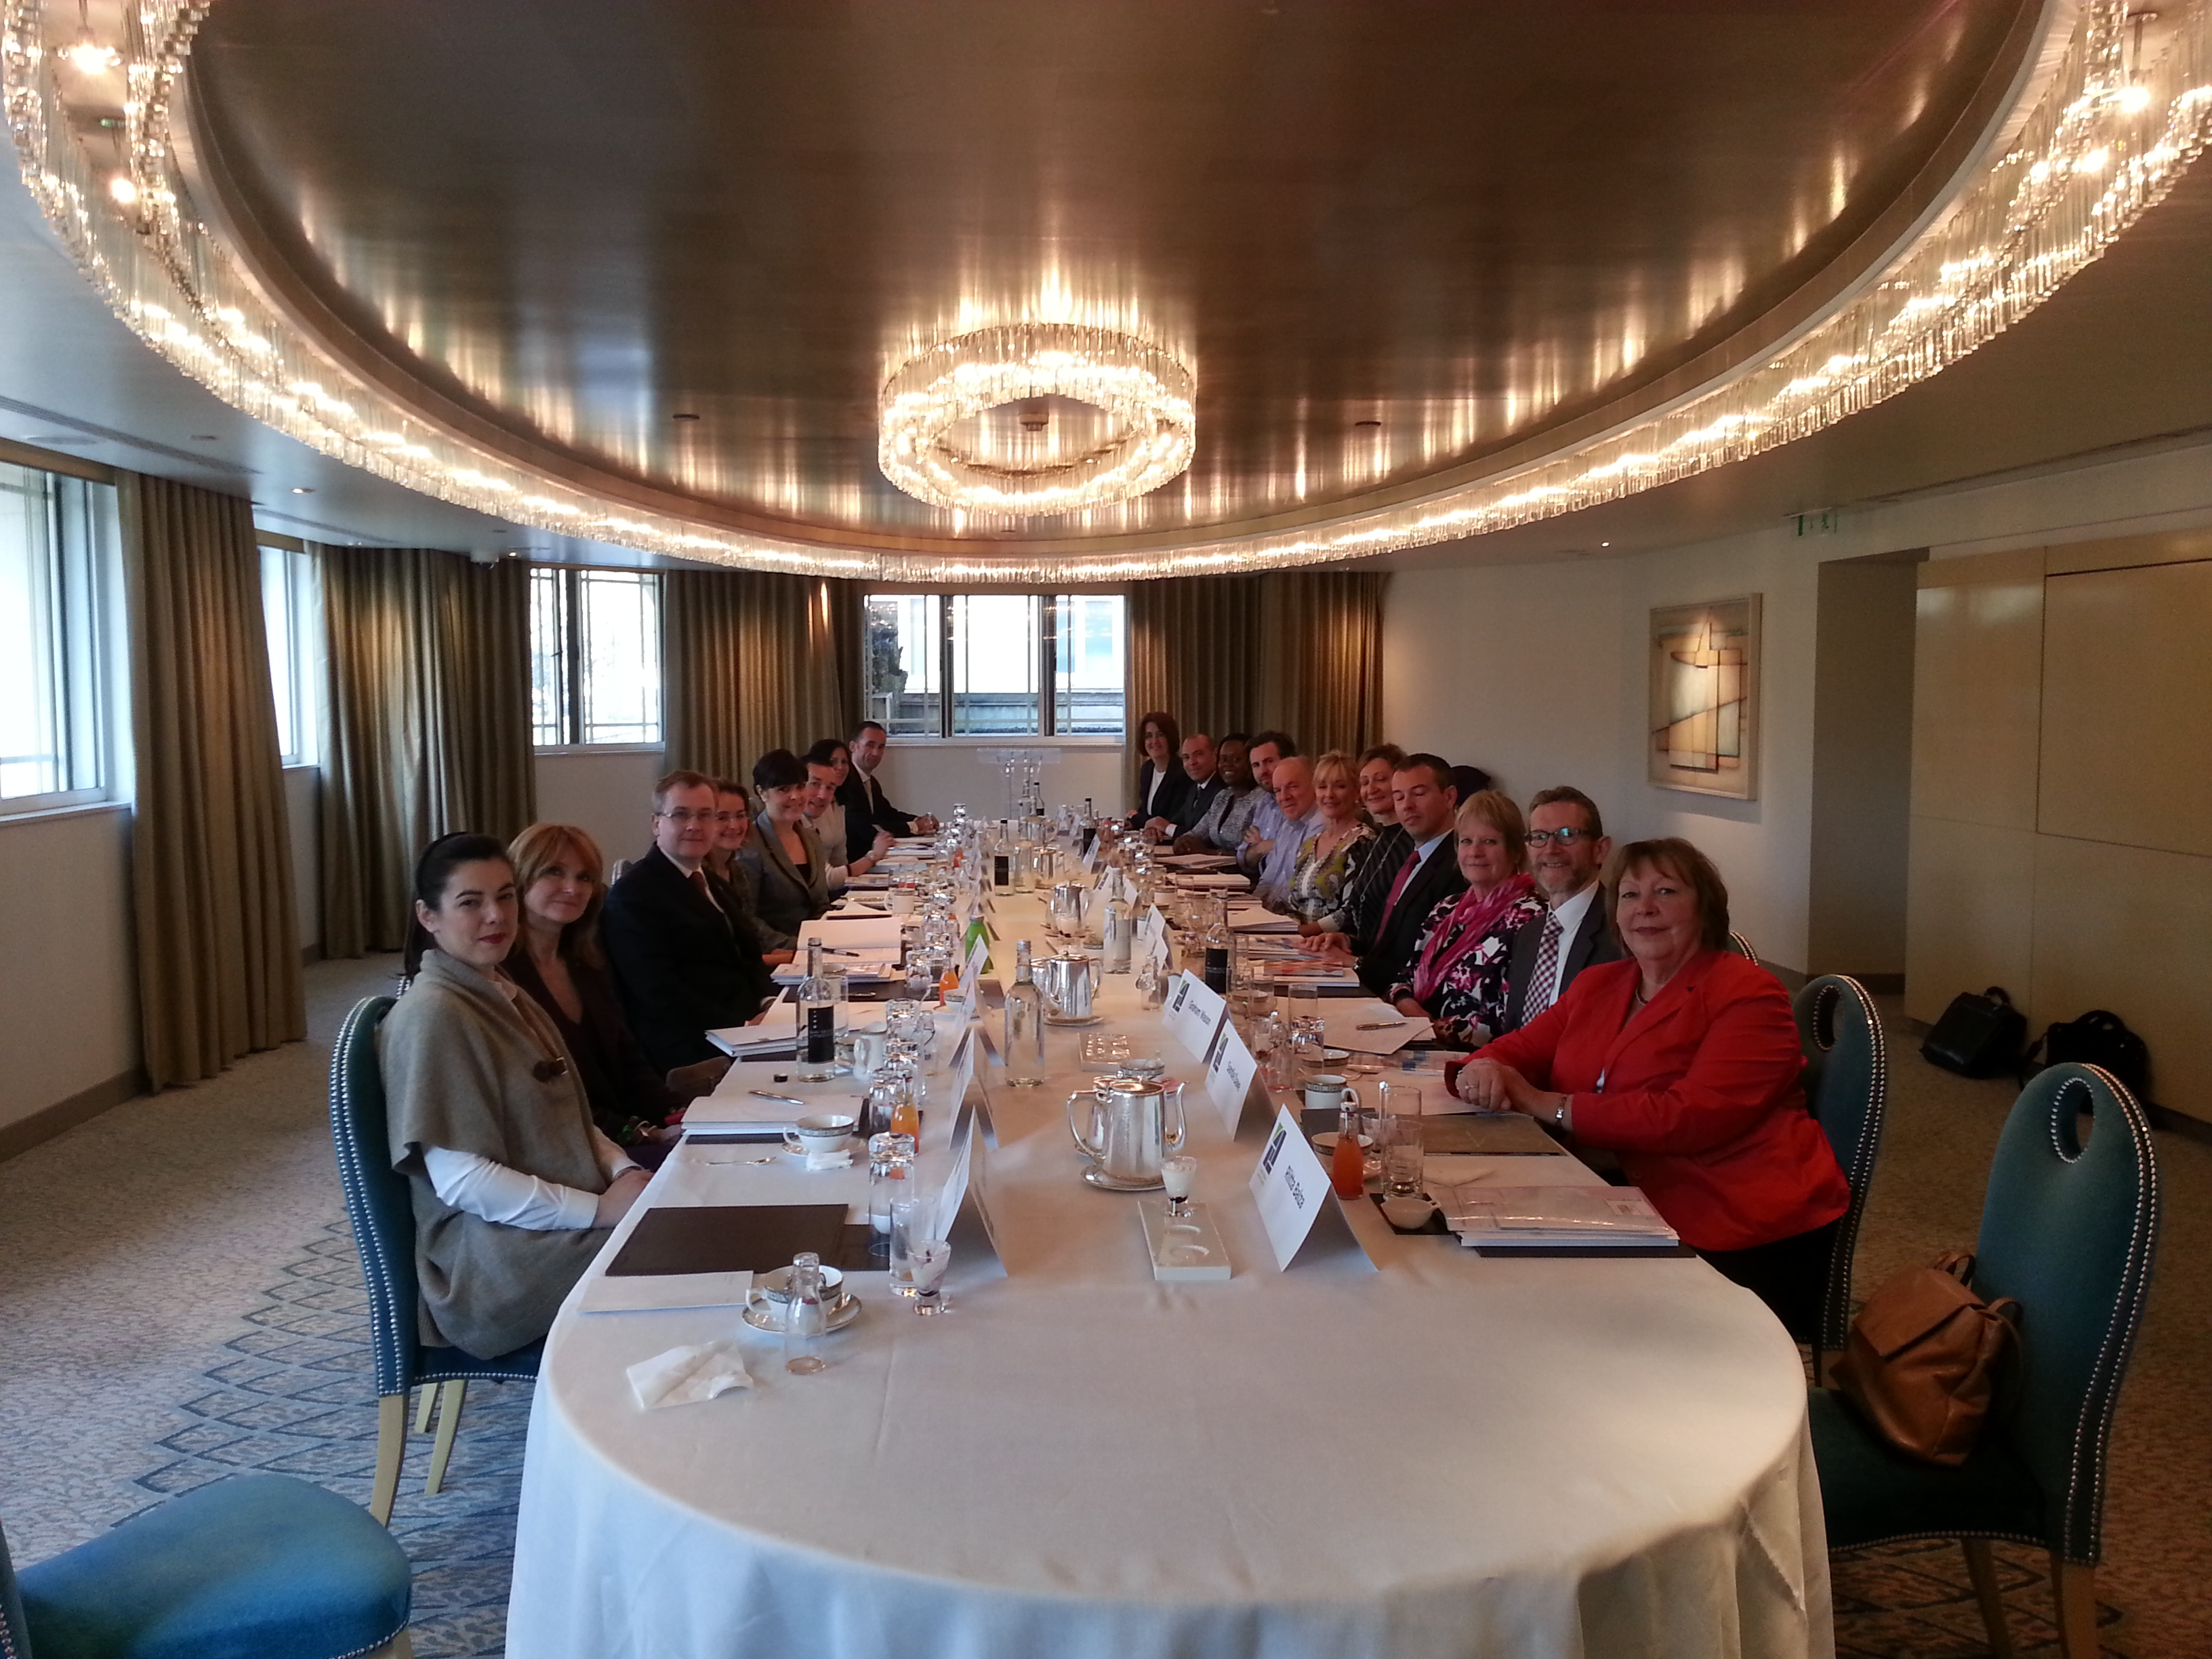 Attendees at the first GWTC roundtable at the Dorchester